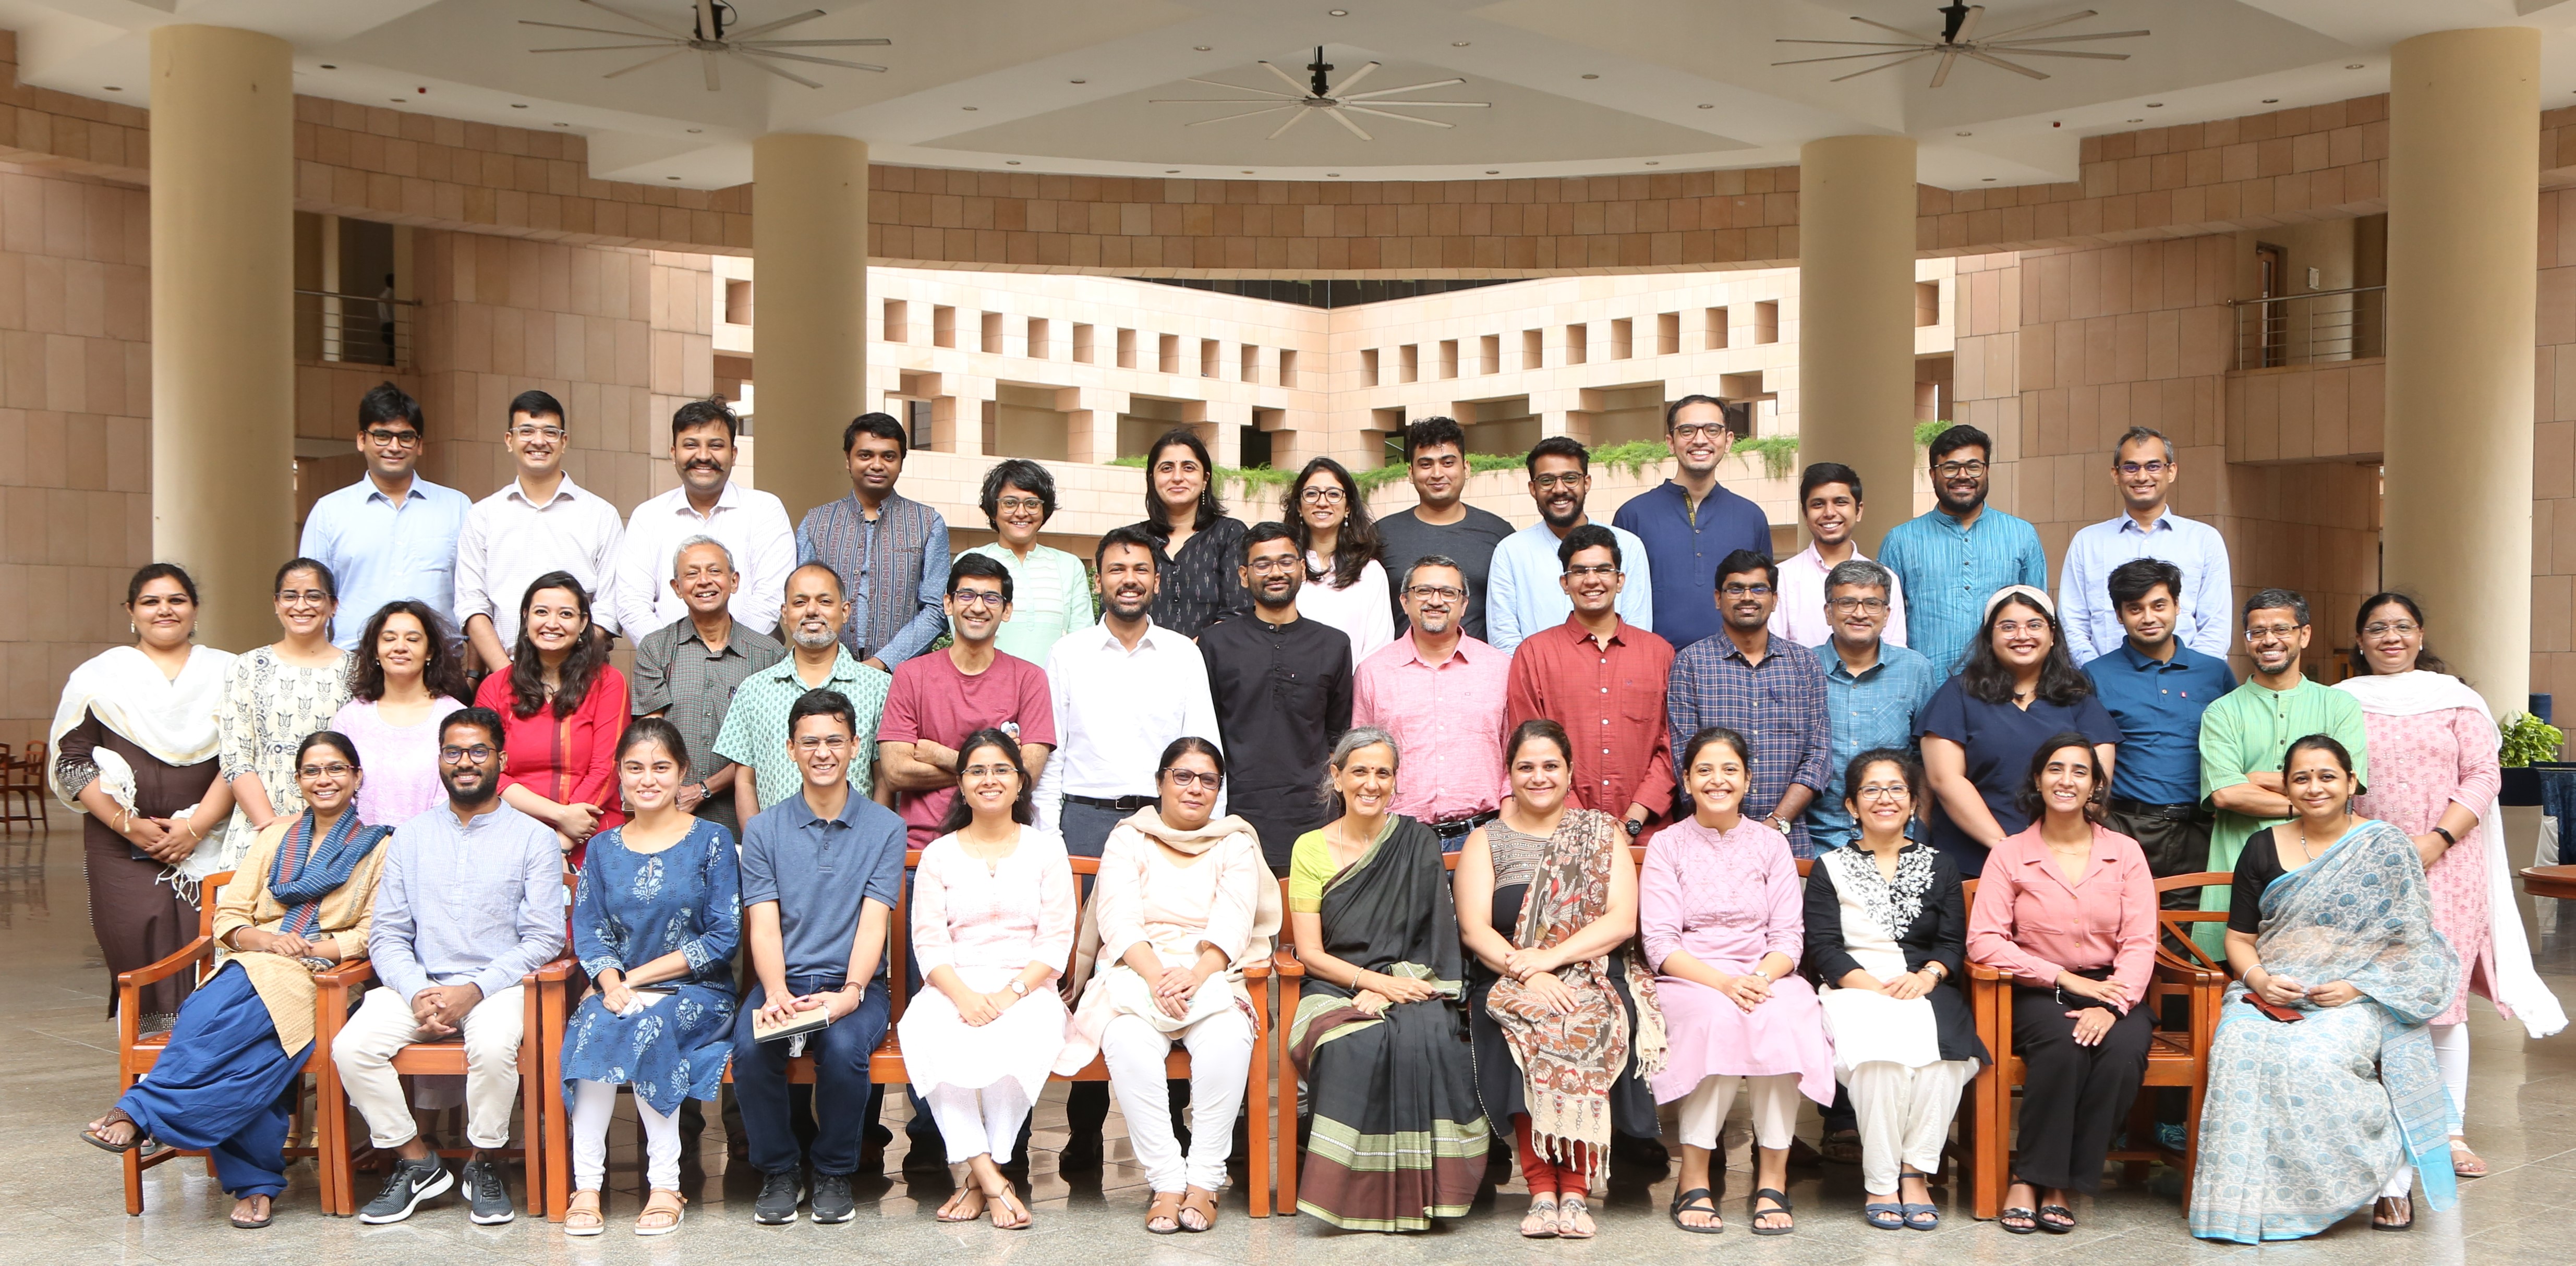 Participants for the SERI Conference, 2022, at ISB's Hyderabad campus